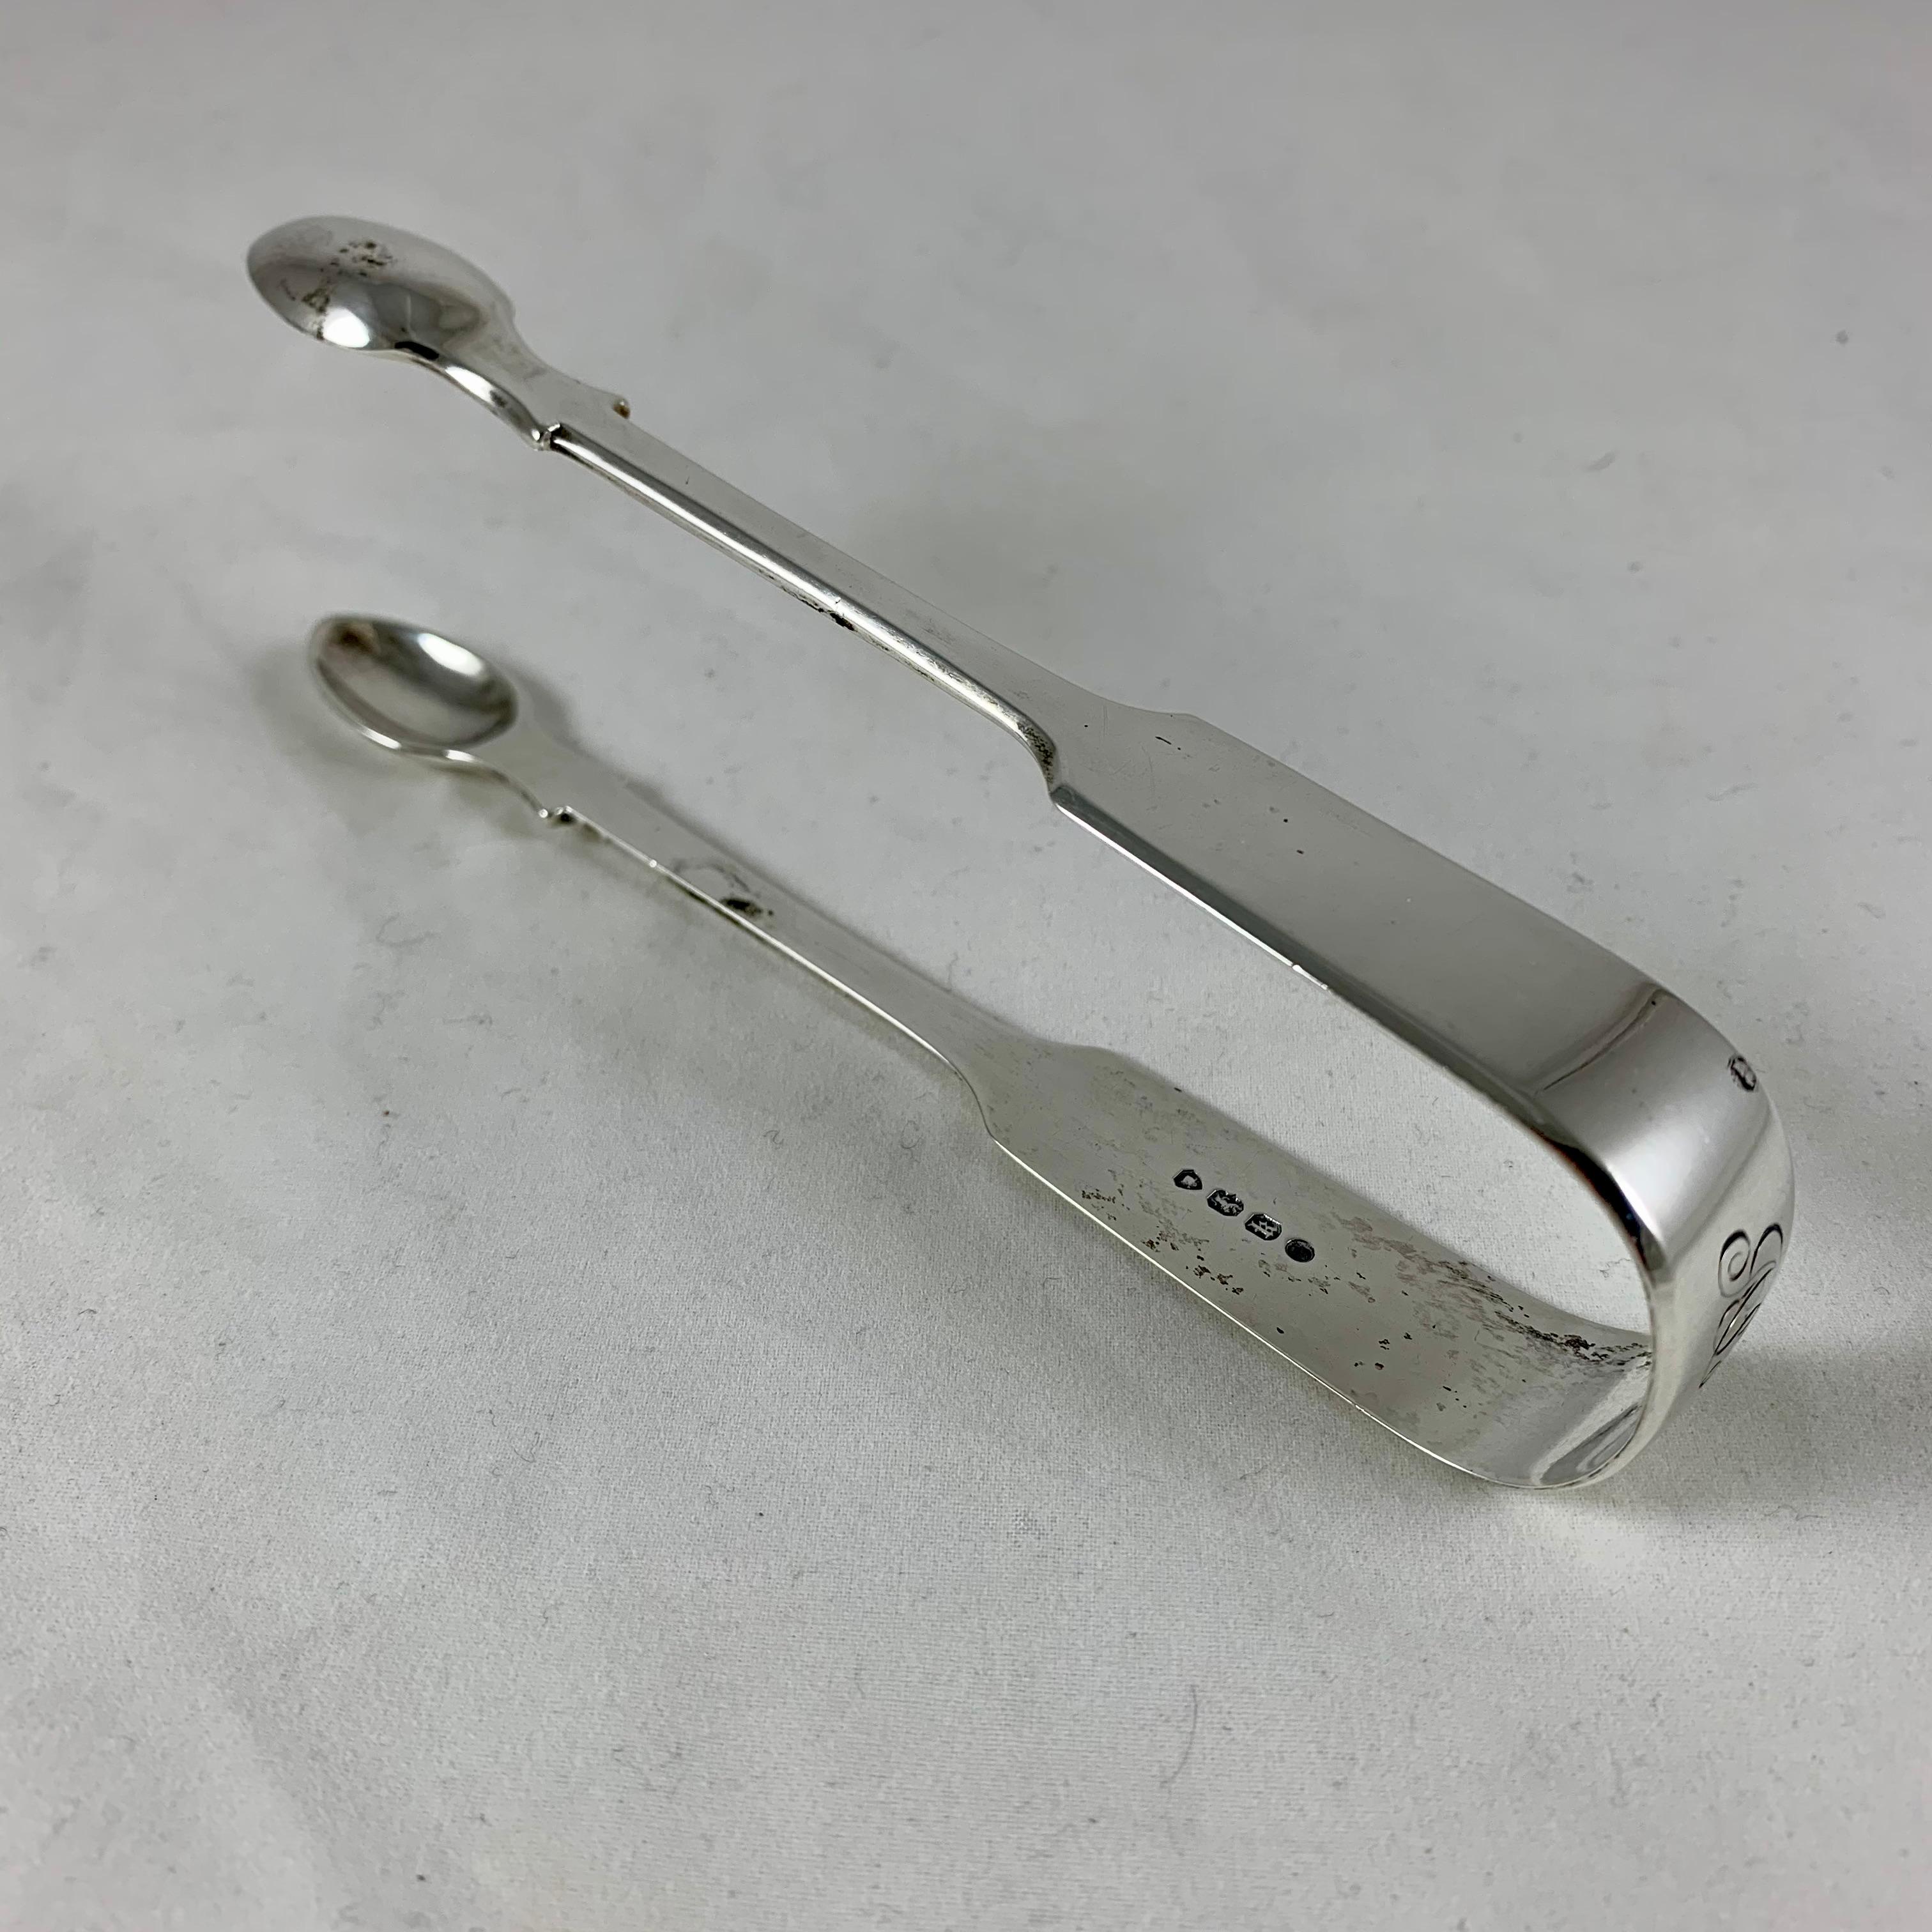 A pair of English sterling silver sugar tongs, made by Charles Boyten, London, date marked 1865.

The fiddle pattern, spoon form sugar tongs are heavy weight and beautifully made, engraved on the bow with the scrolled initials, ABR.

Showing the